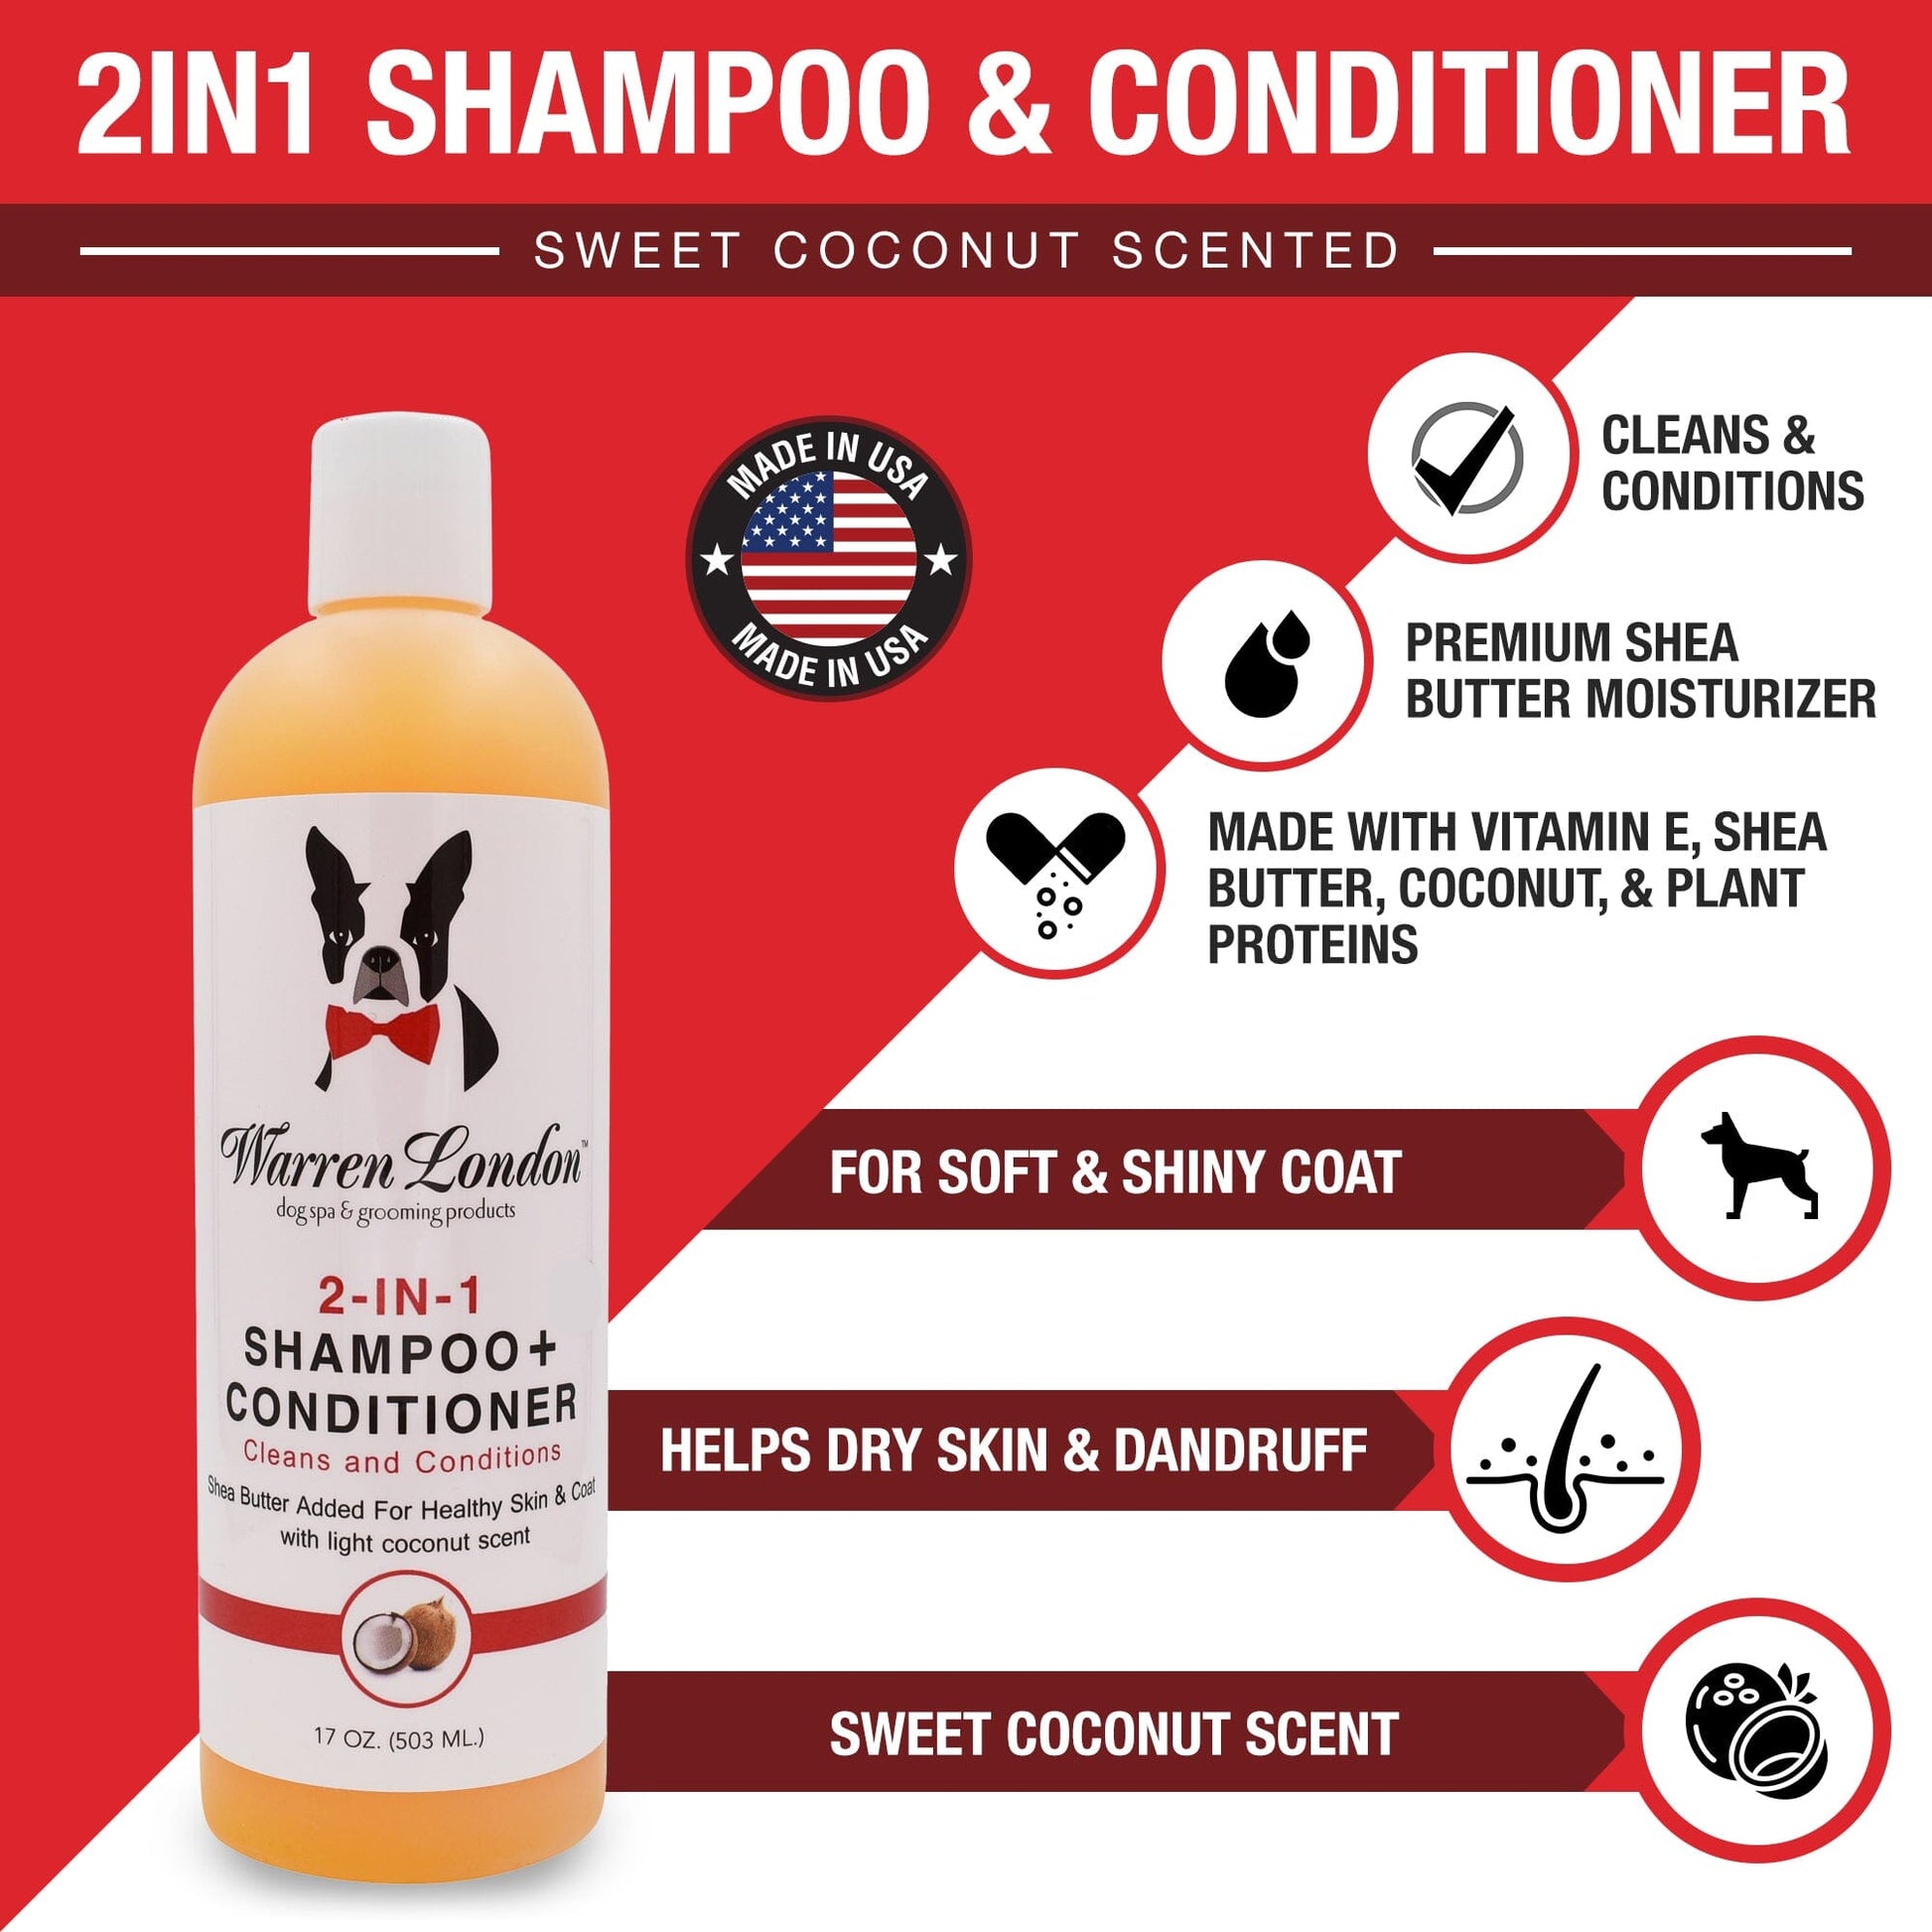 2-in-1 Shampoo + Conditioner - Coconut Scented - Professional Size Grooming Size Product Warren London 